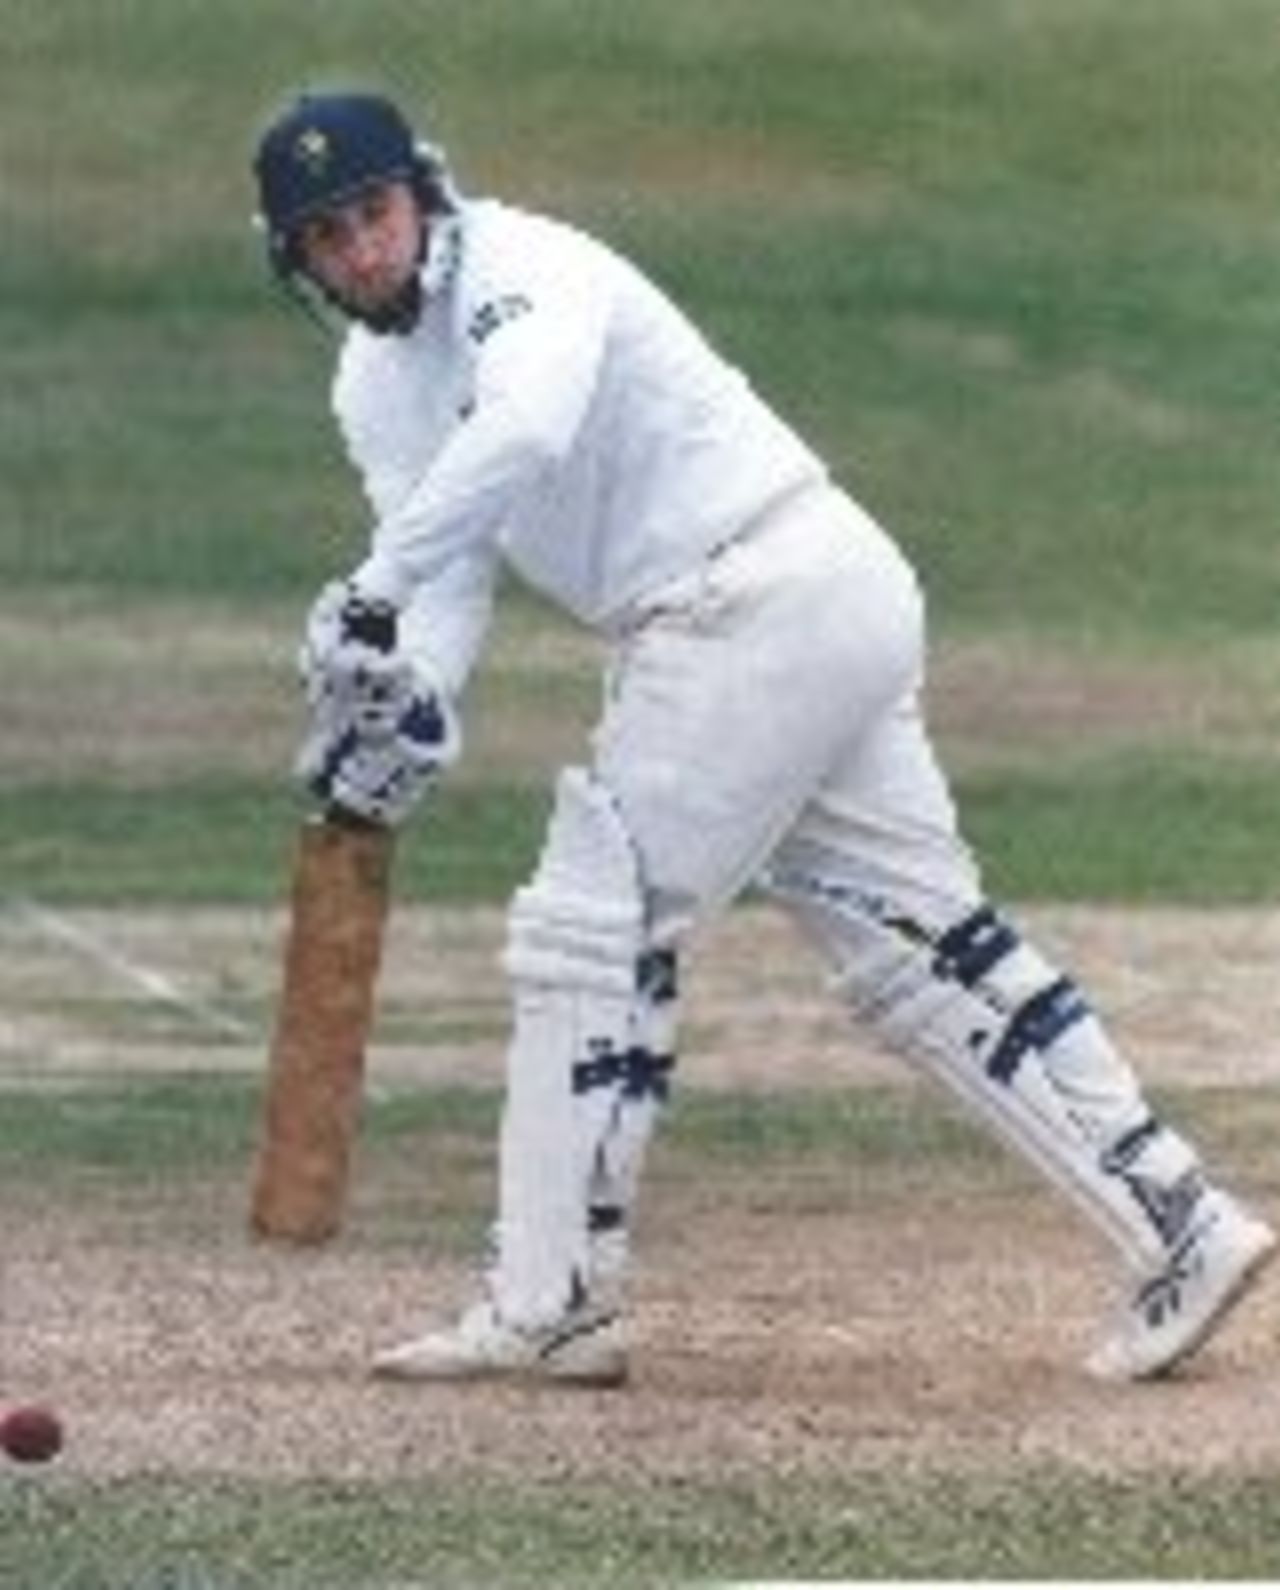 Neil Kendrick plays the ball to leg whilst batting for Glamorgan against Middlesex at Colwyn Bay in 1995